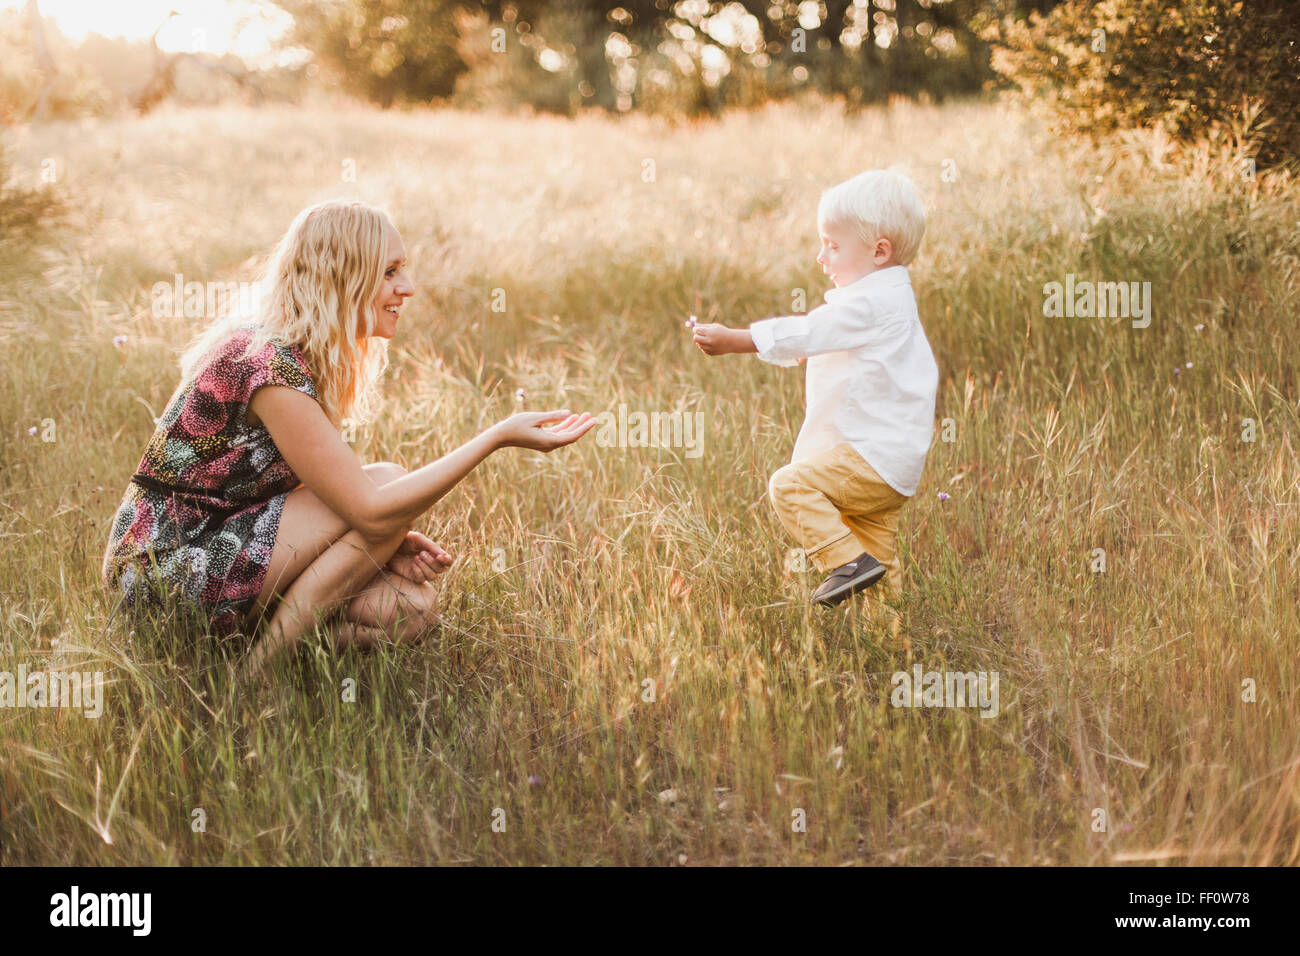 Mother and son playing in field Stock Photo